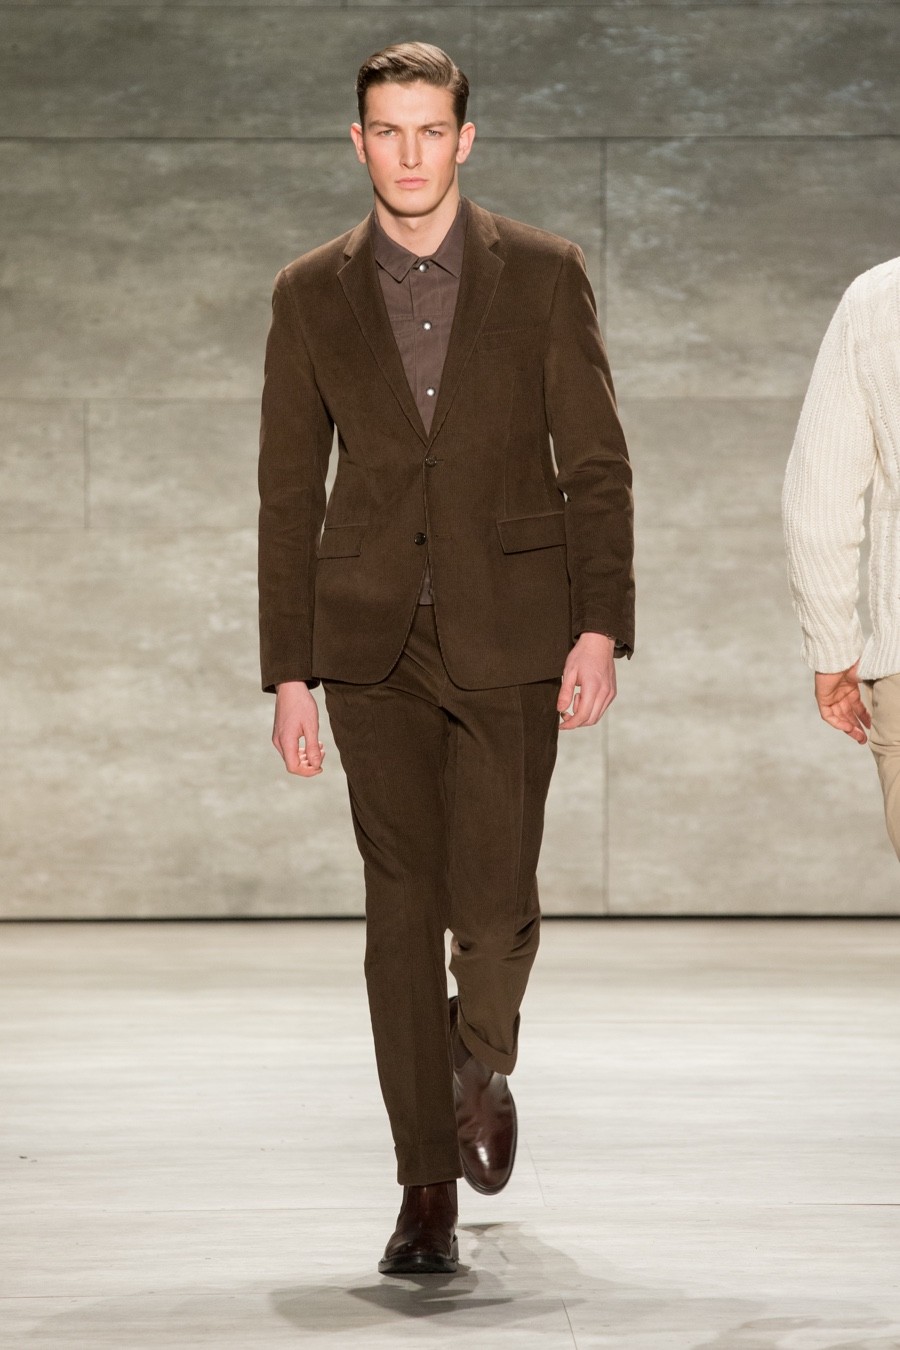 Todd Snyder Fall Winter 2015 Menswear Collection 017